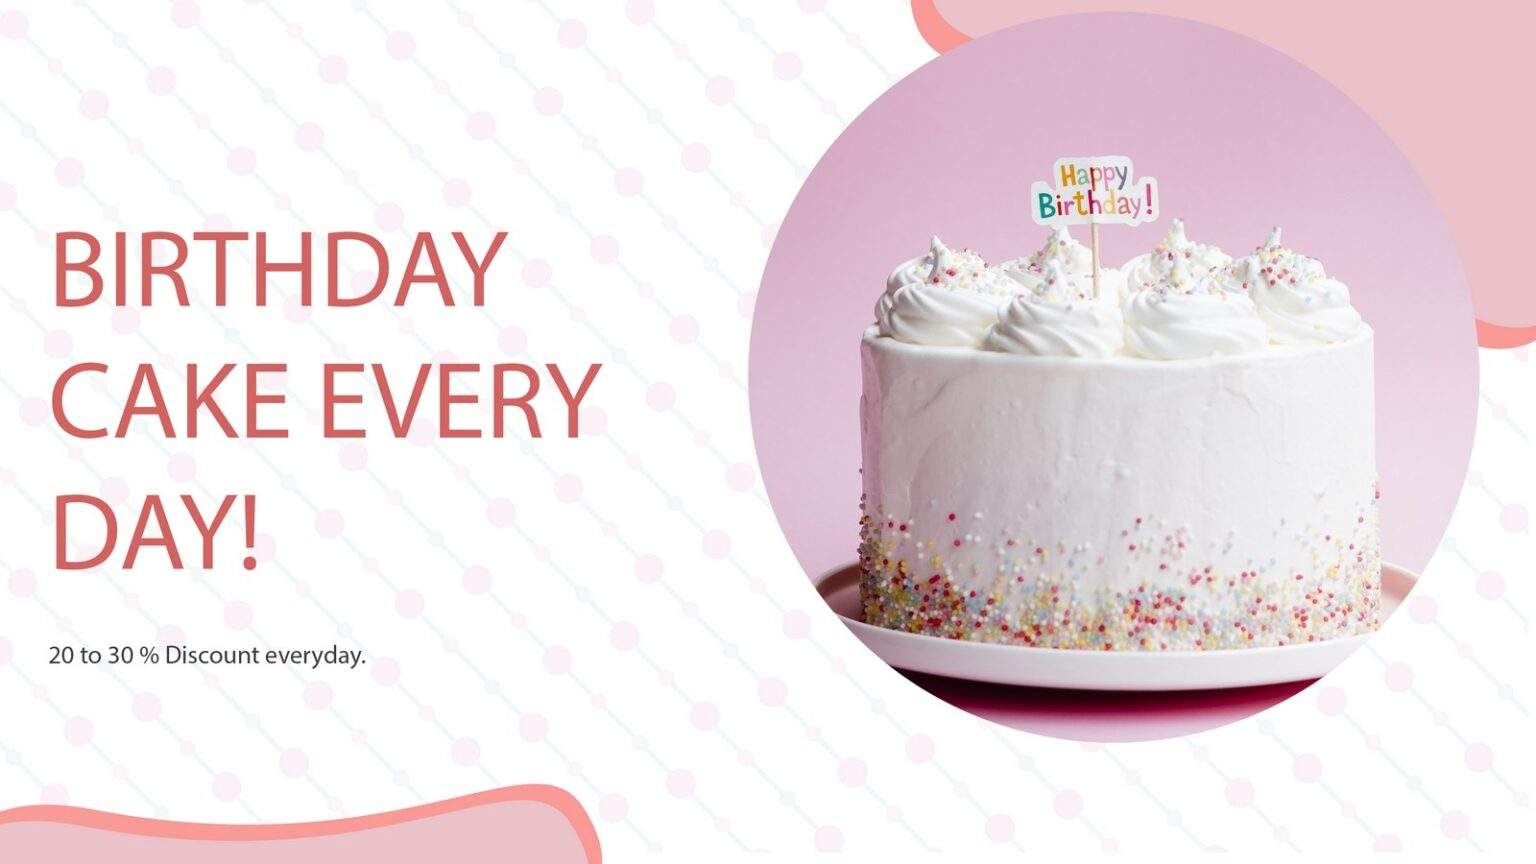 Order Birthday Cake Online | Free Same Day Delivery in 2 hrs - MFT